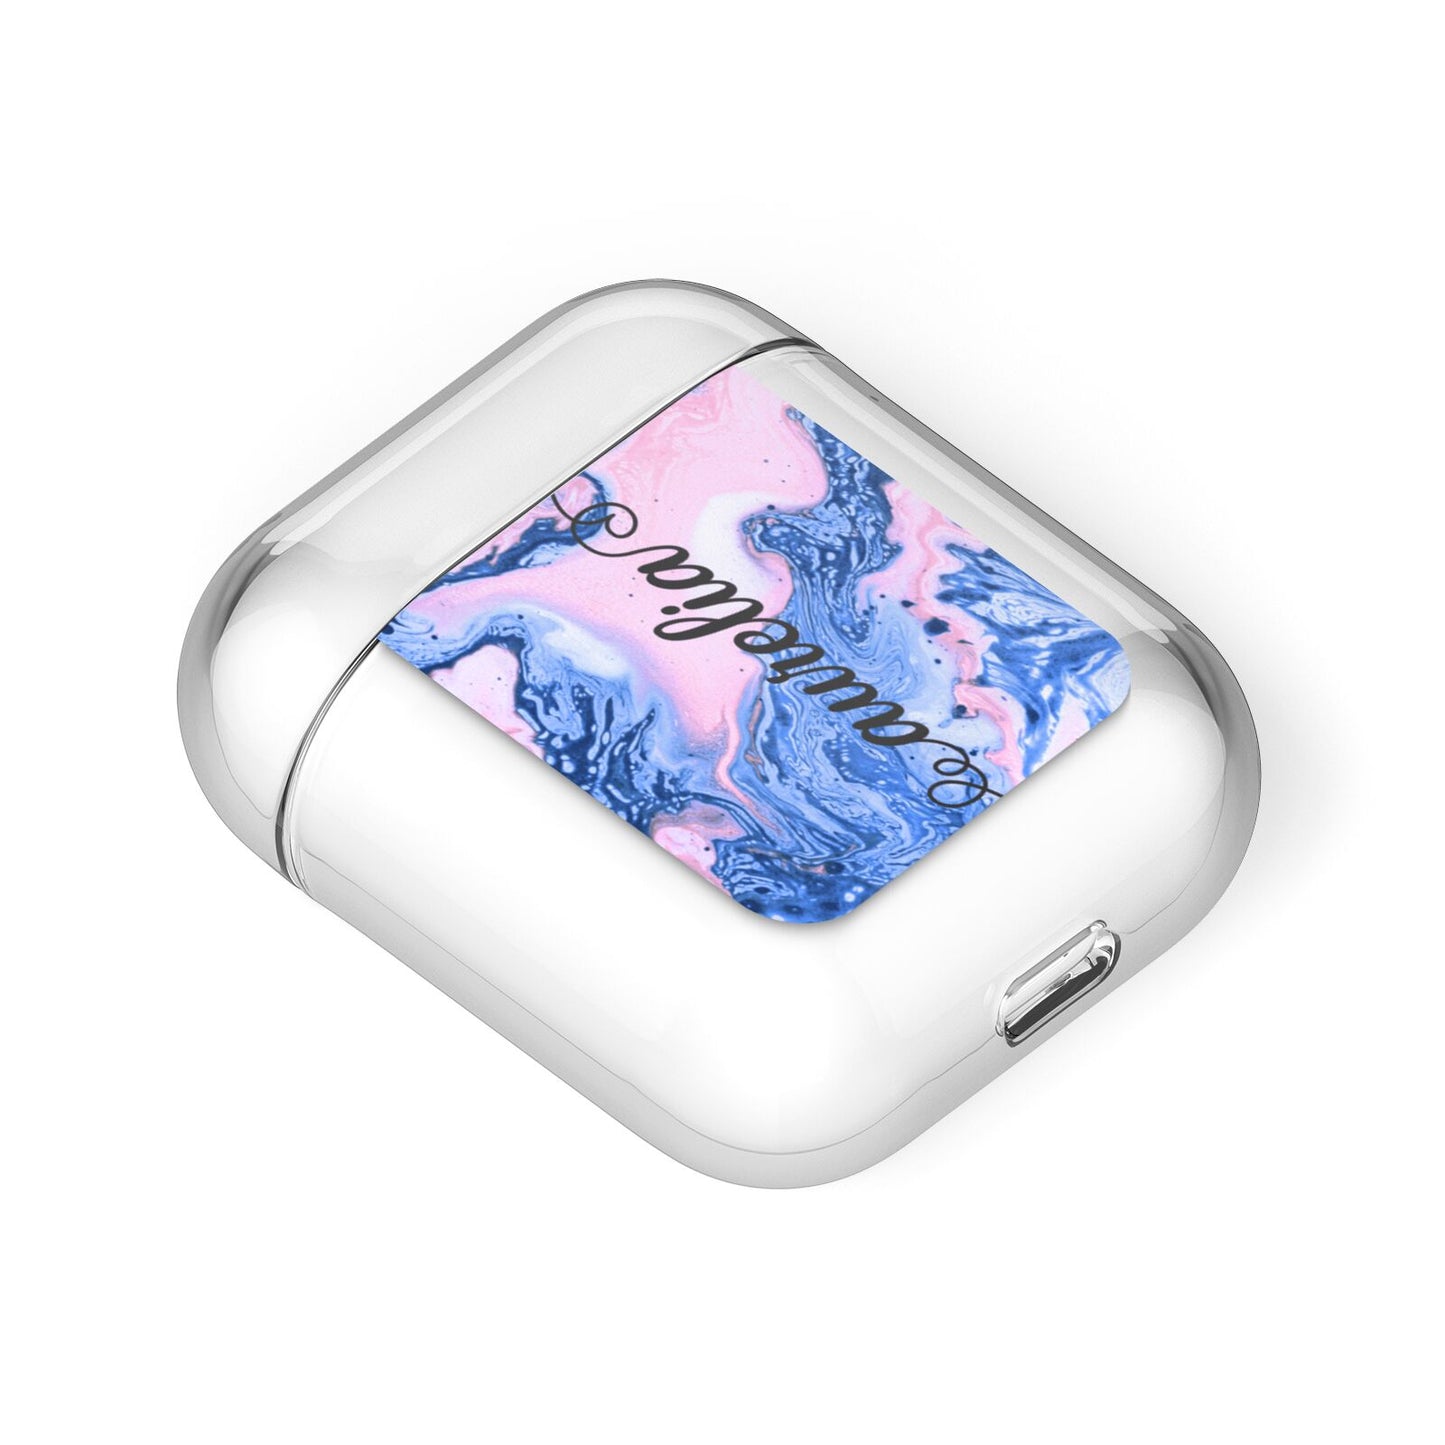 Ocean Blue and Pink Marble AirPods Case Laid Flat